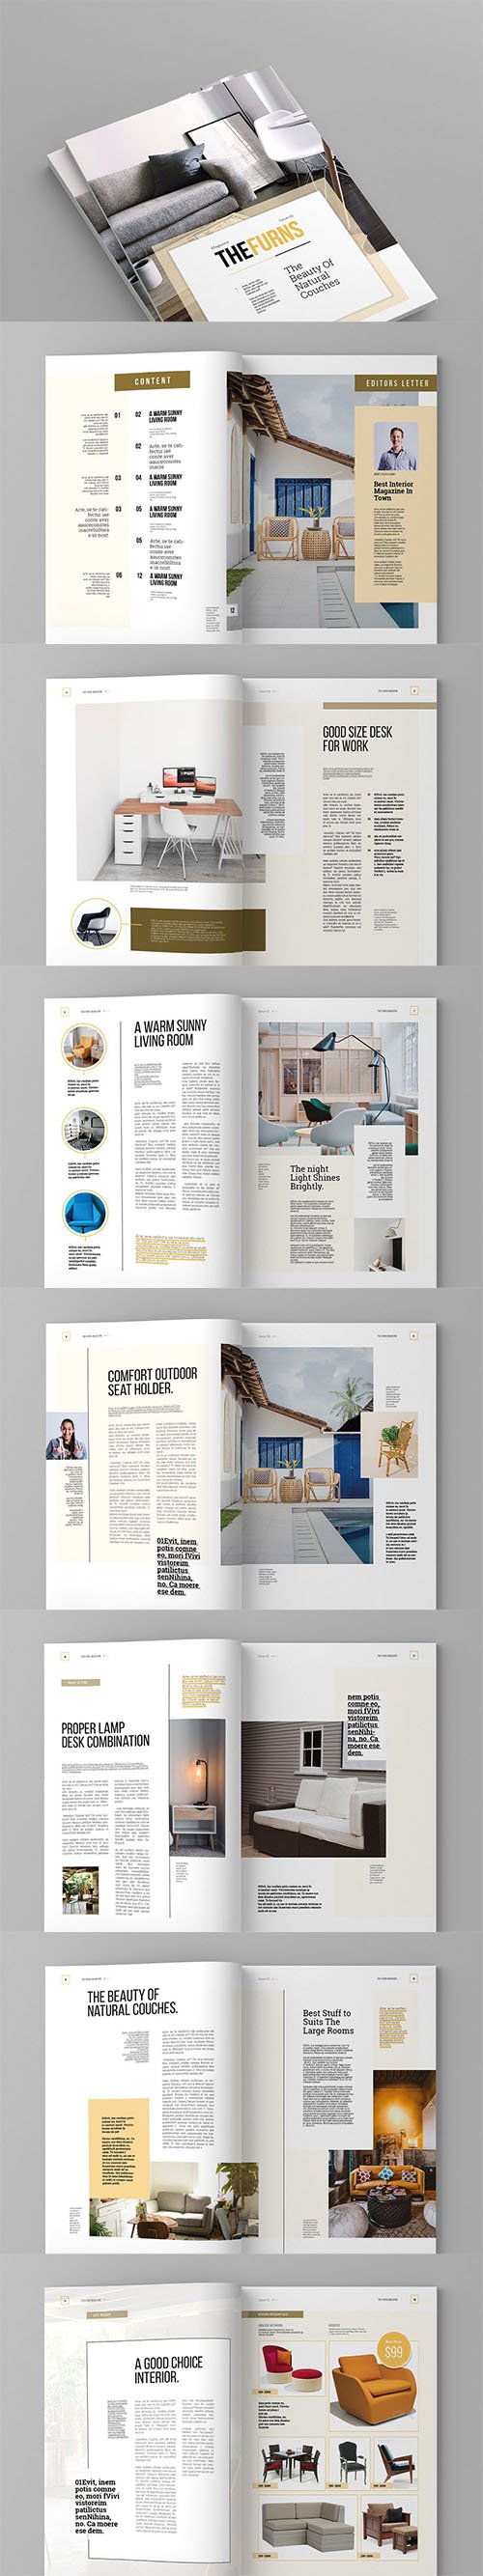 The Furns - Magazine Template 4358971